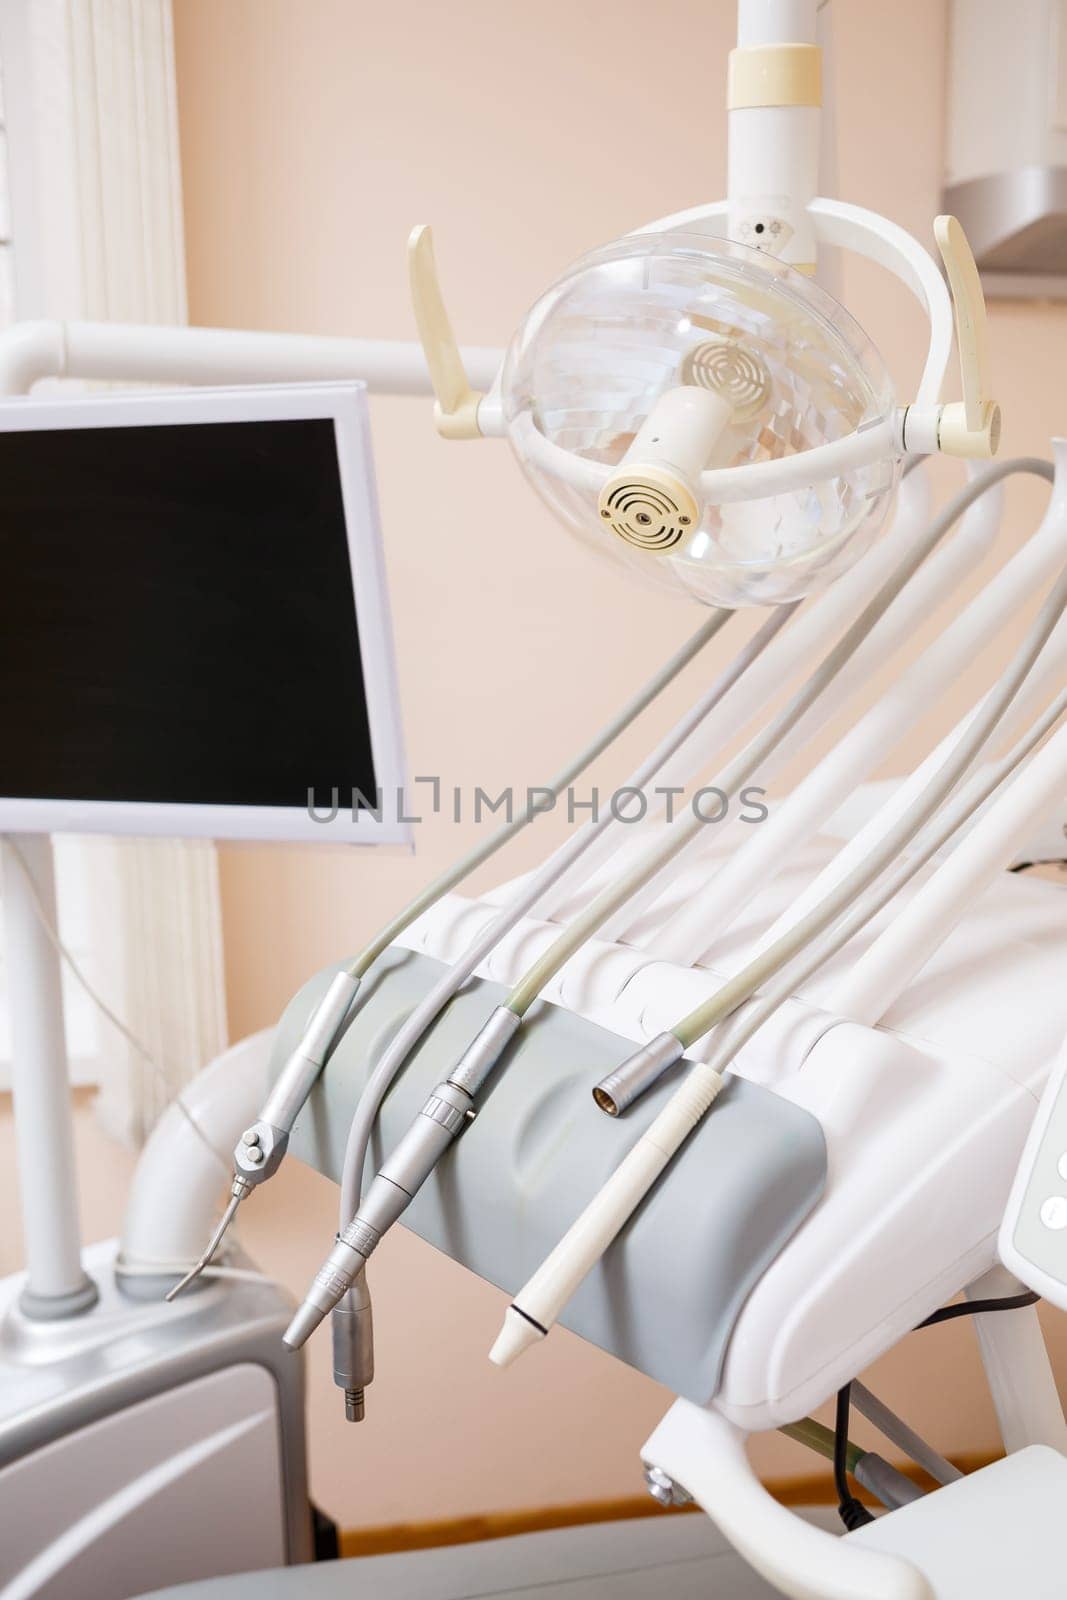 Dental treatment device for patients. The workplace of a professional dentist. Healthy teeth. Dental office with nobody in by Dmitrytph